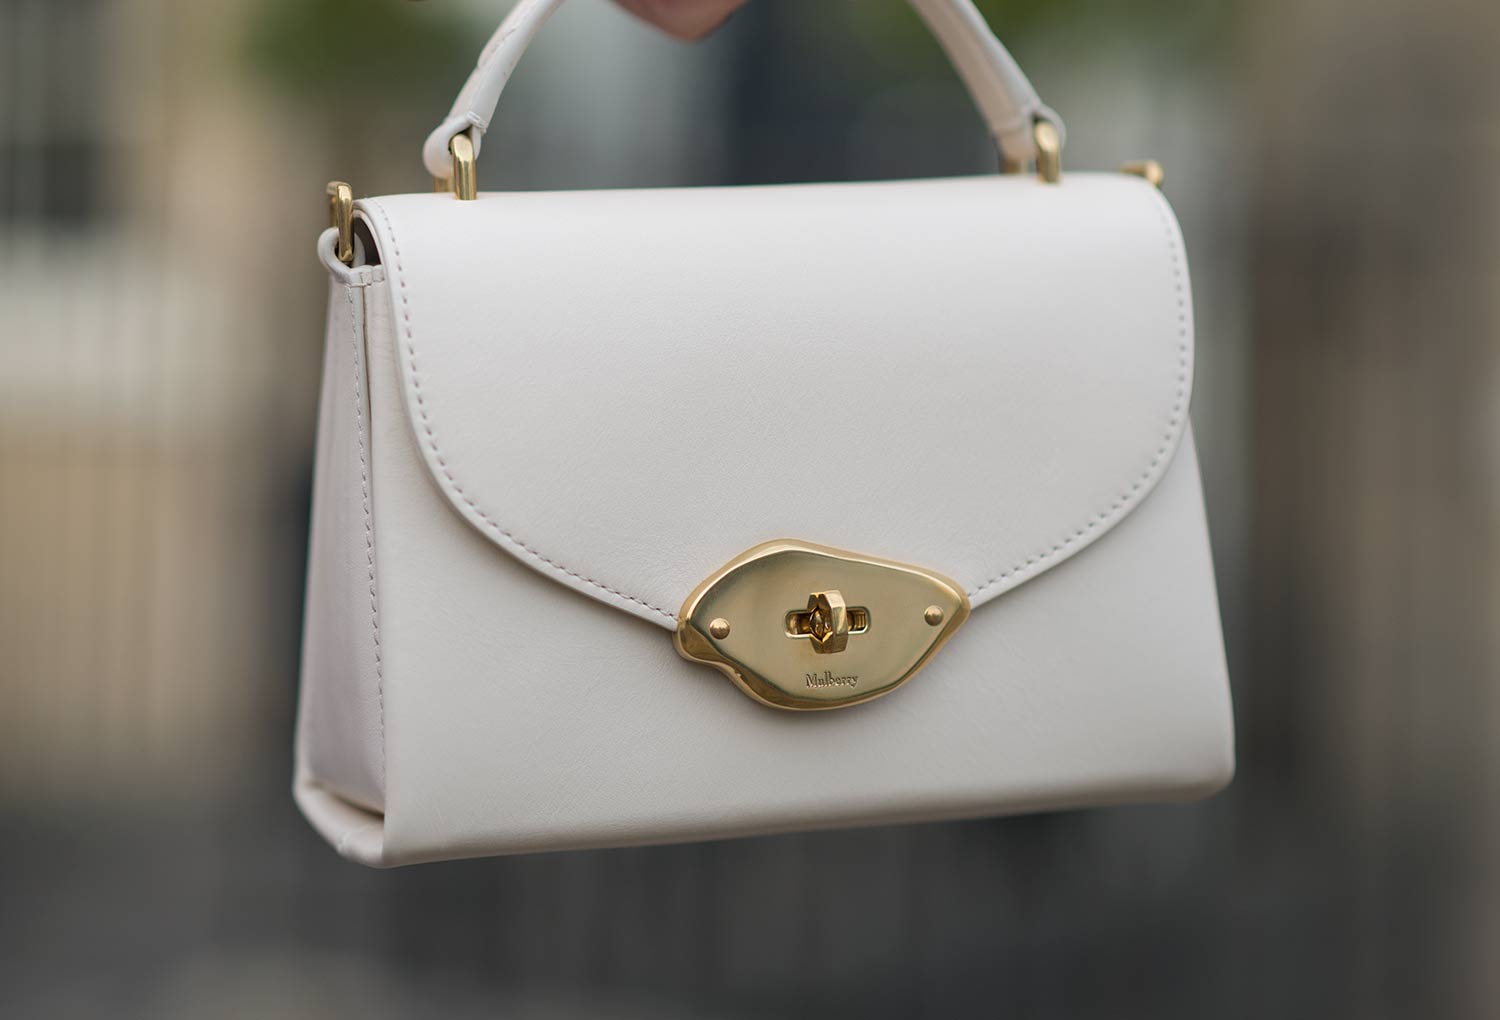 Mulberry Small Lana Top Handle Bag Review - FORD LA FEMME